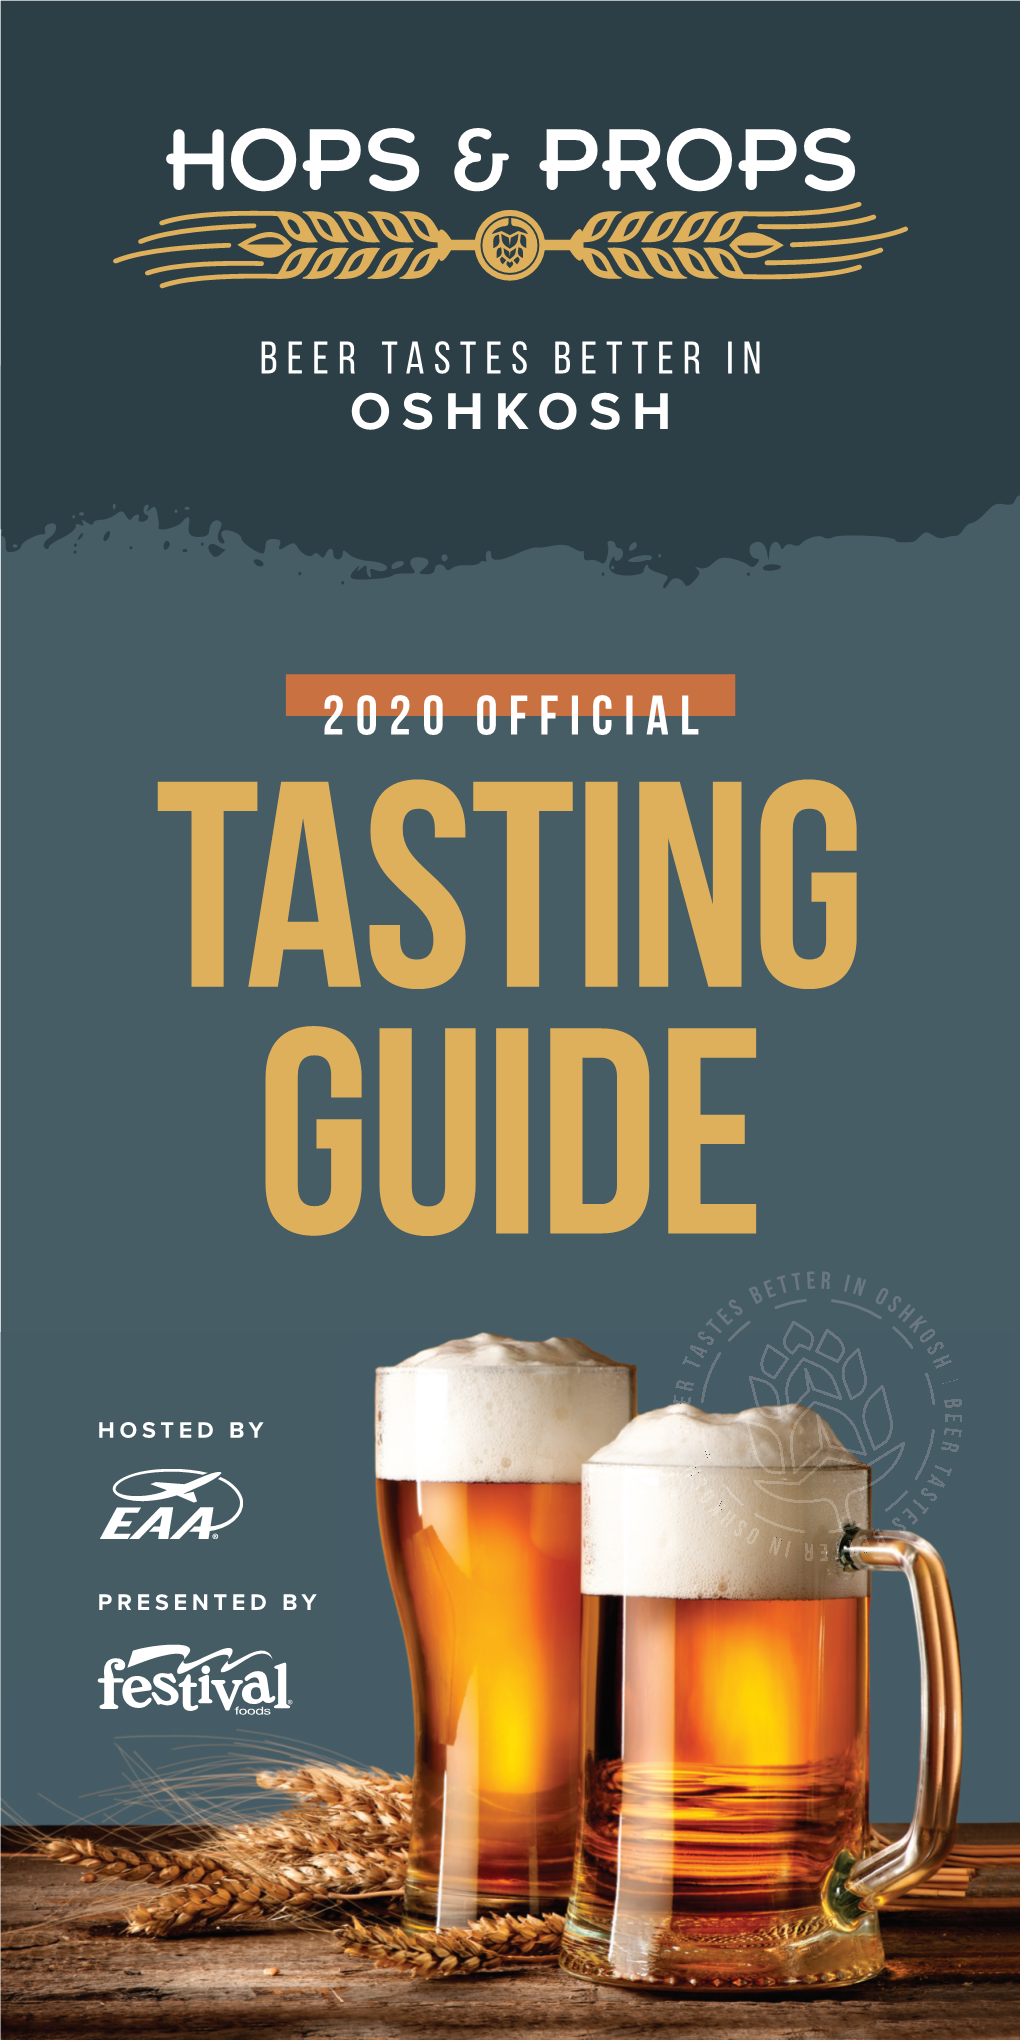 2020 Official TASTING GUIDE